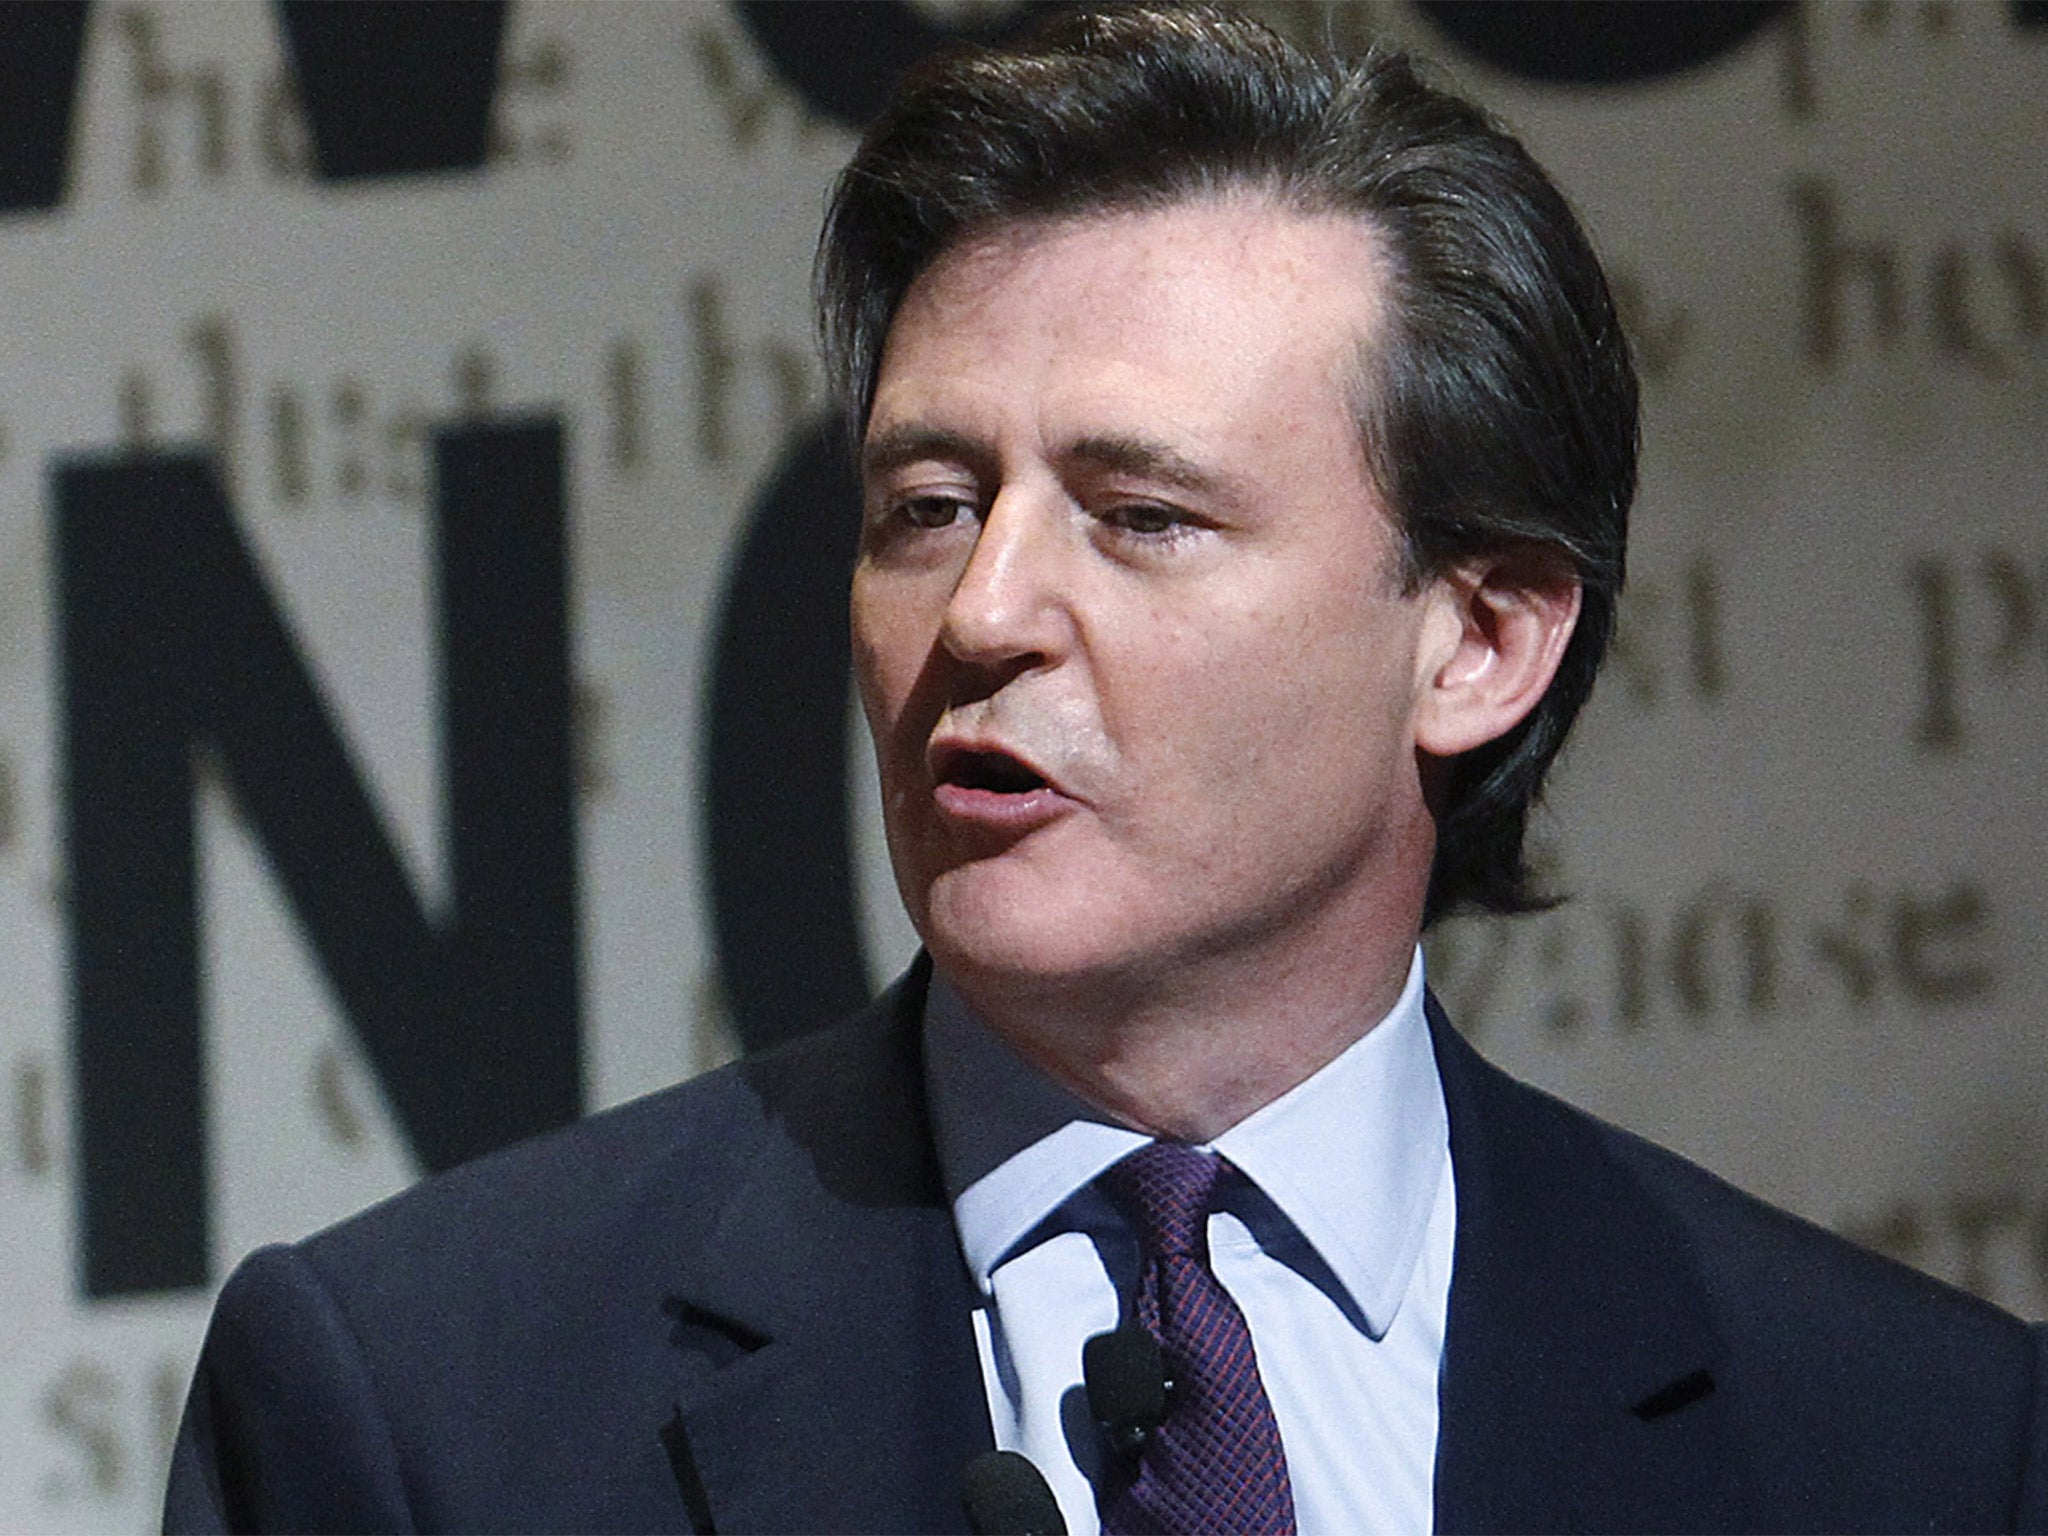 John Micklethwait has served as editor of The Economist for nine years